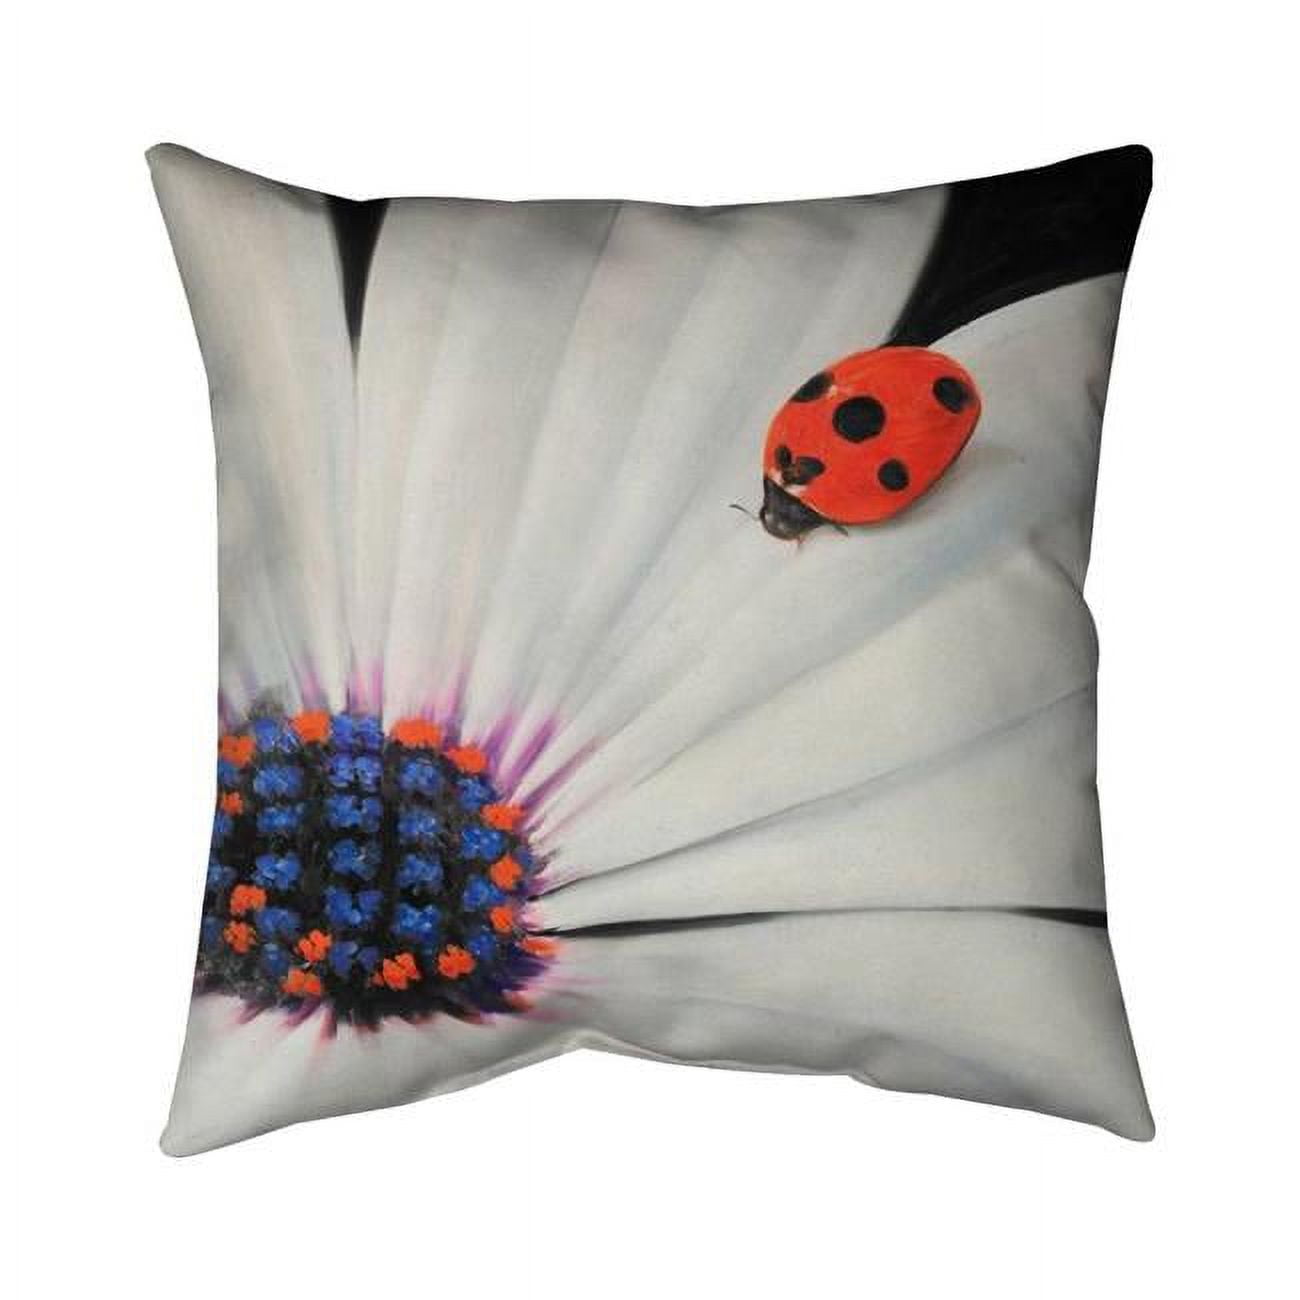 Begin Home Decor 5543-1616-FL175 16 x 16 in. White Daisy & Ladybug-Double Sided Print Indoor Pillow Cover